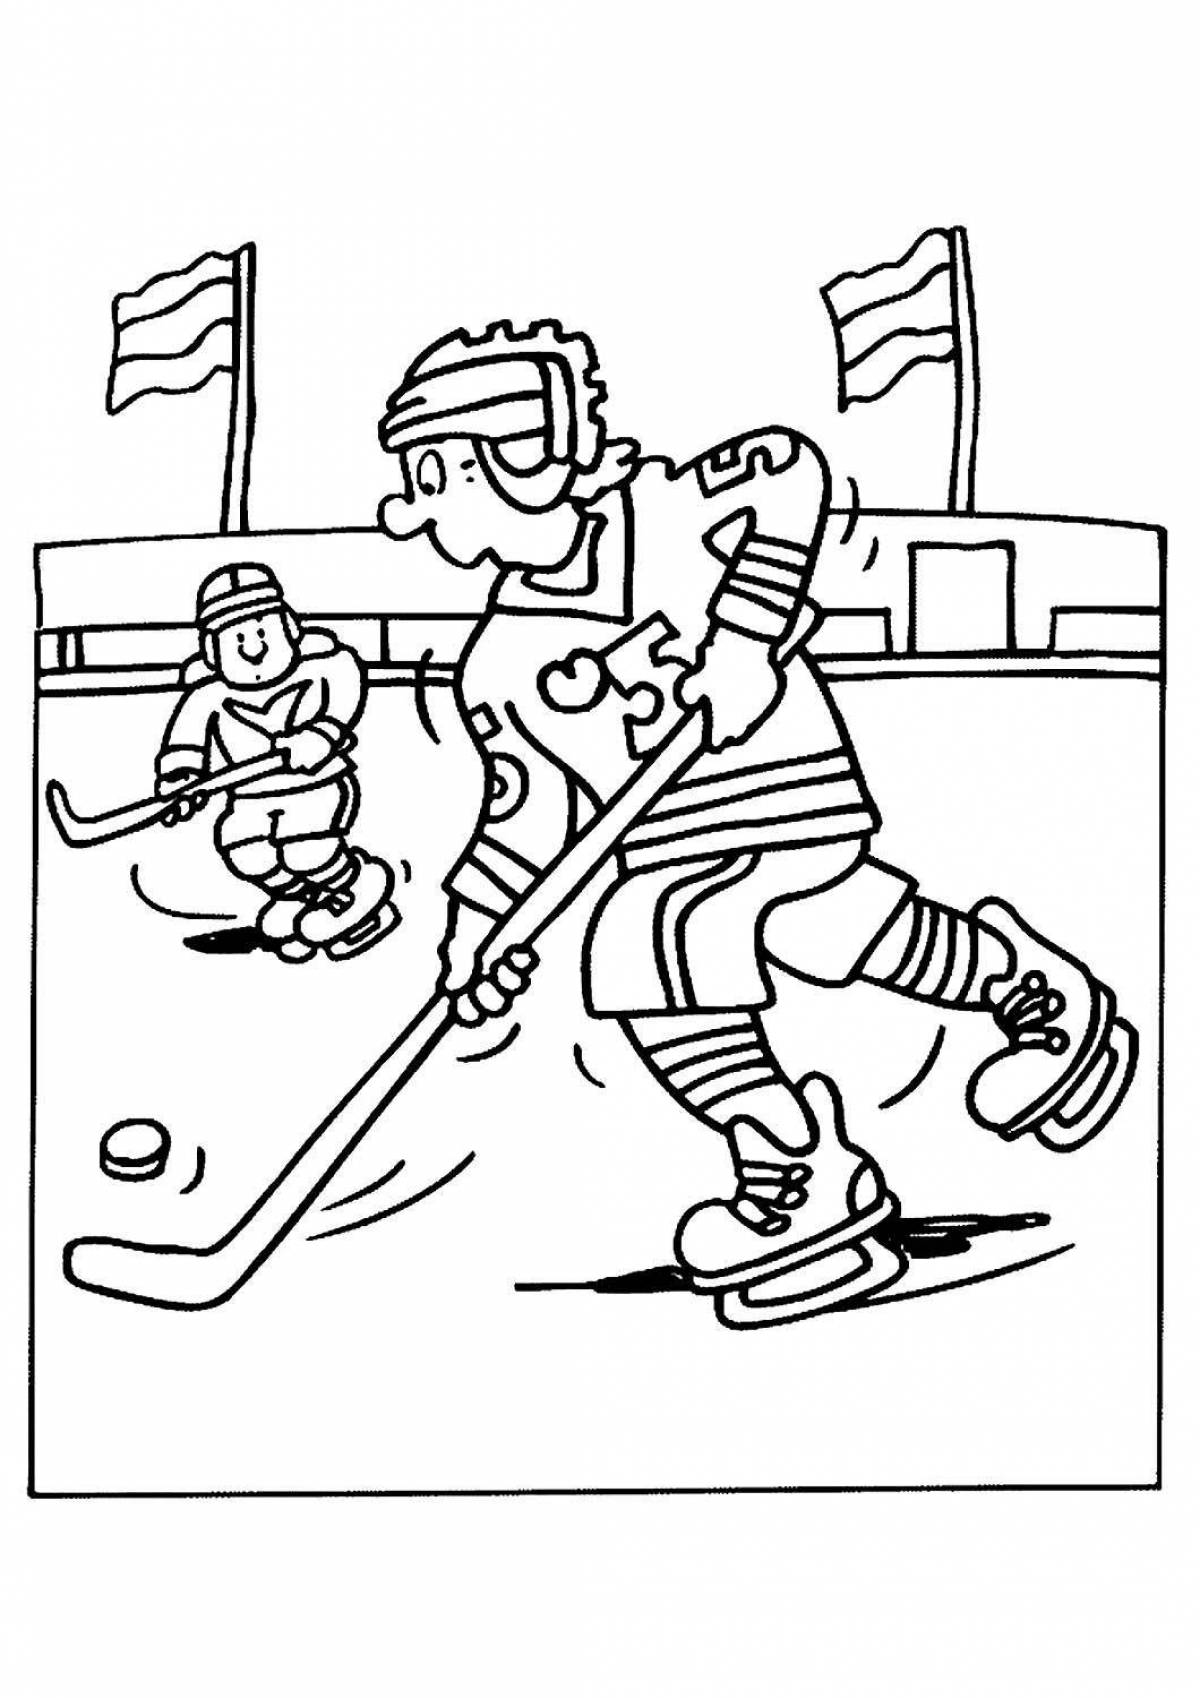 Funny winter sports coloring book for kindergarten